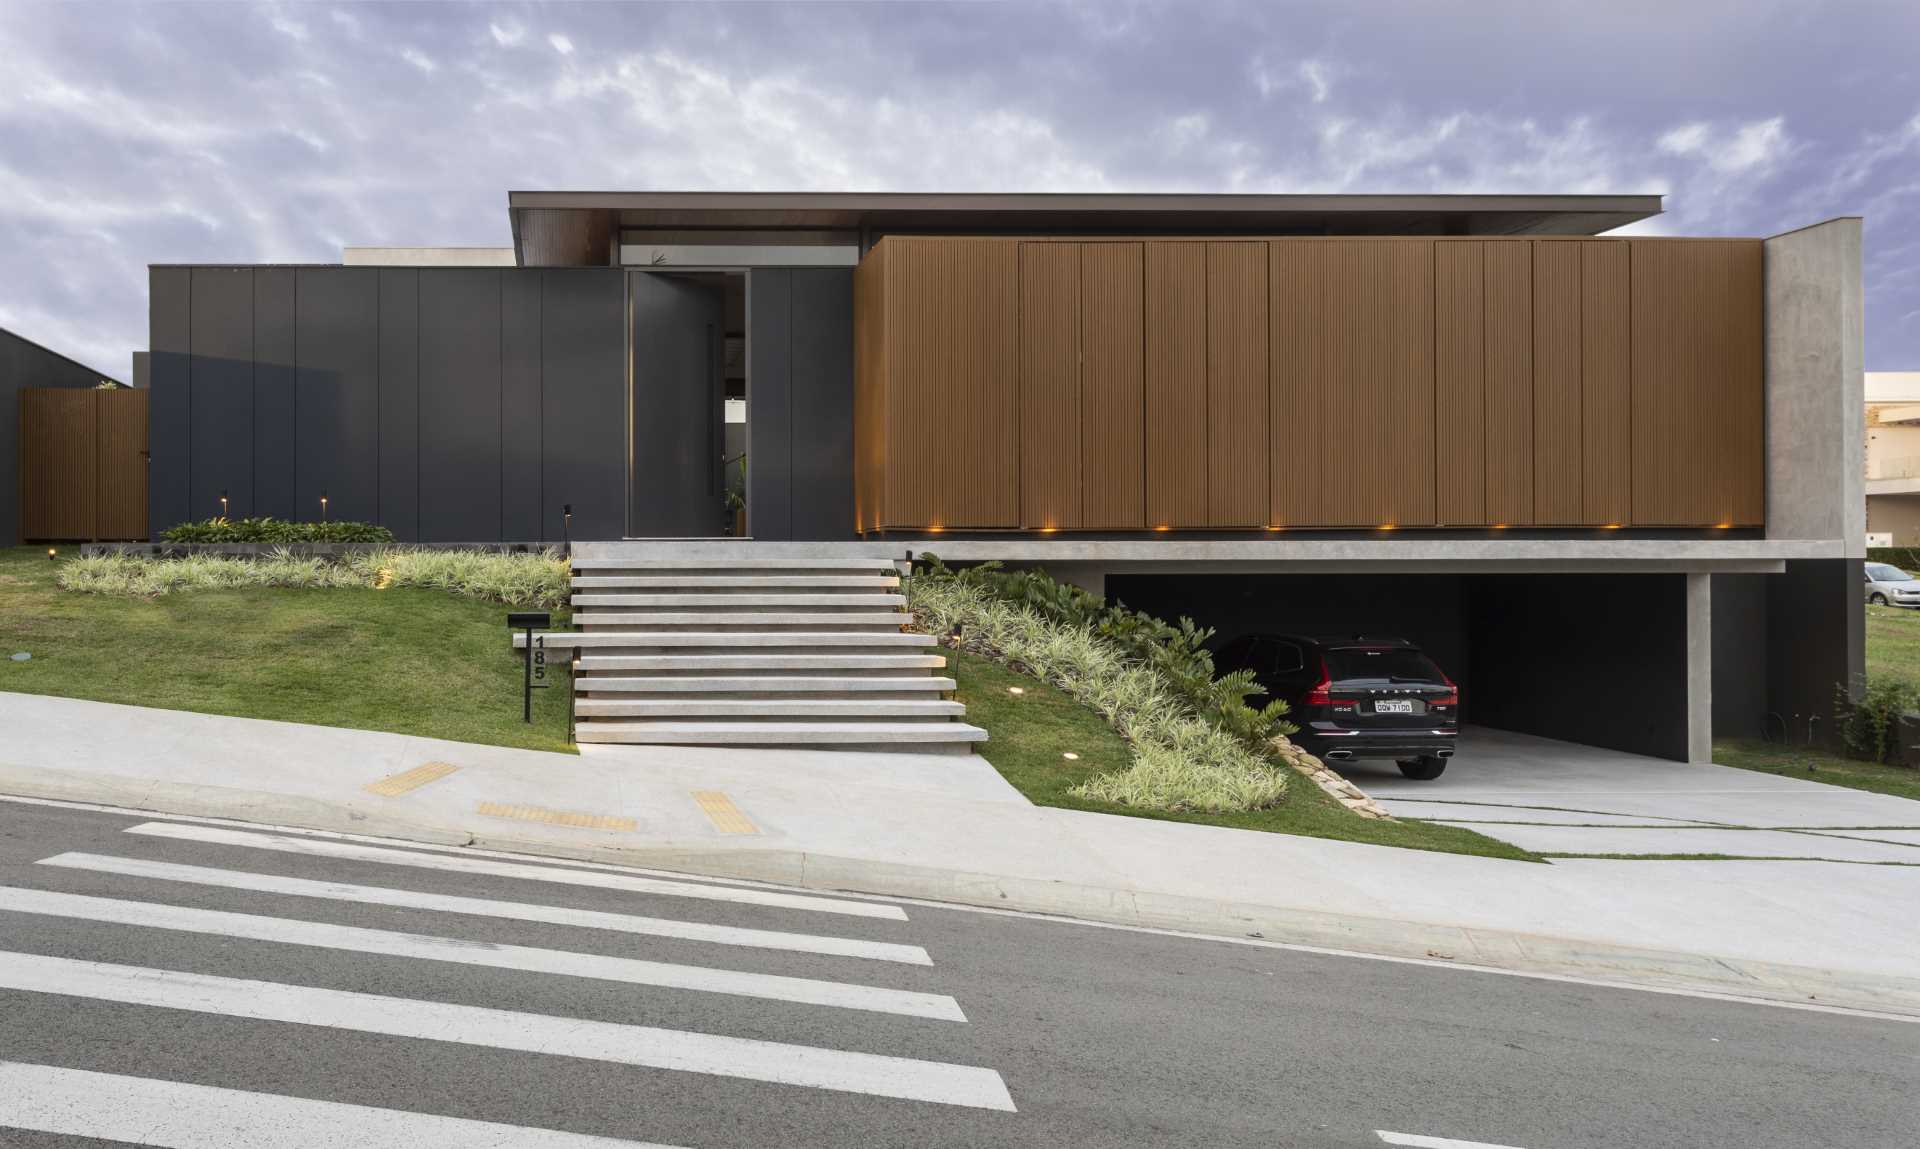 The home has been designed in such a way that the interior is hidden from the street. The front door blends into the black and wood facade.